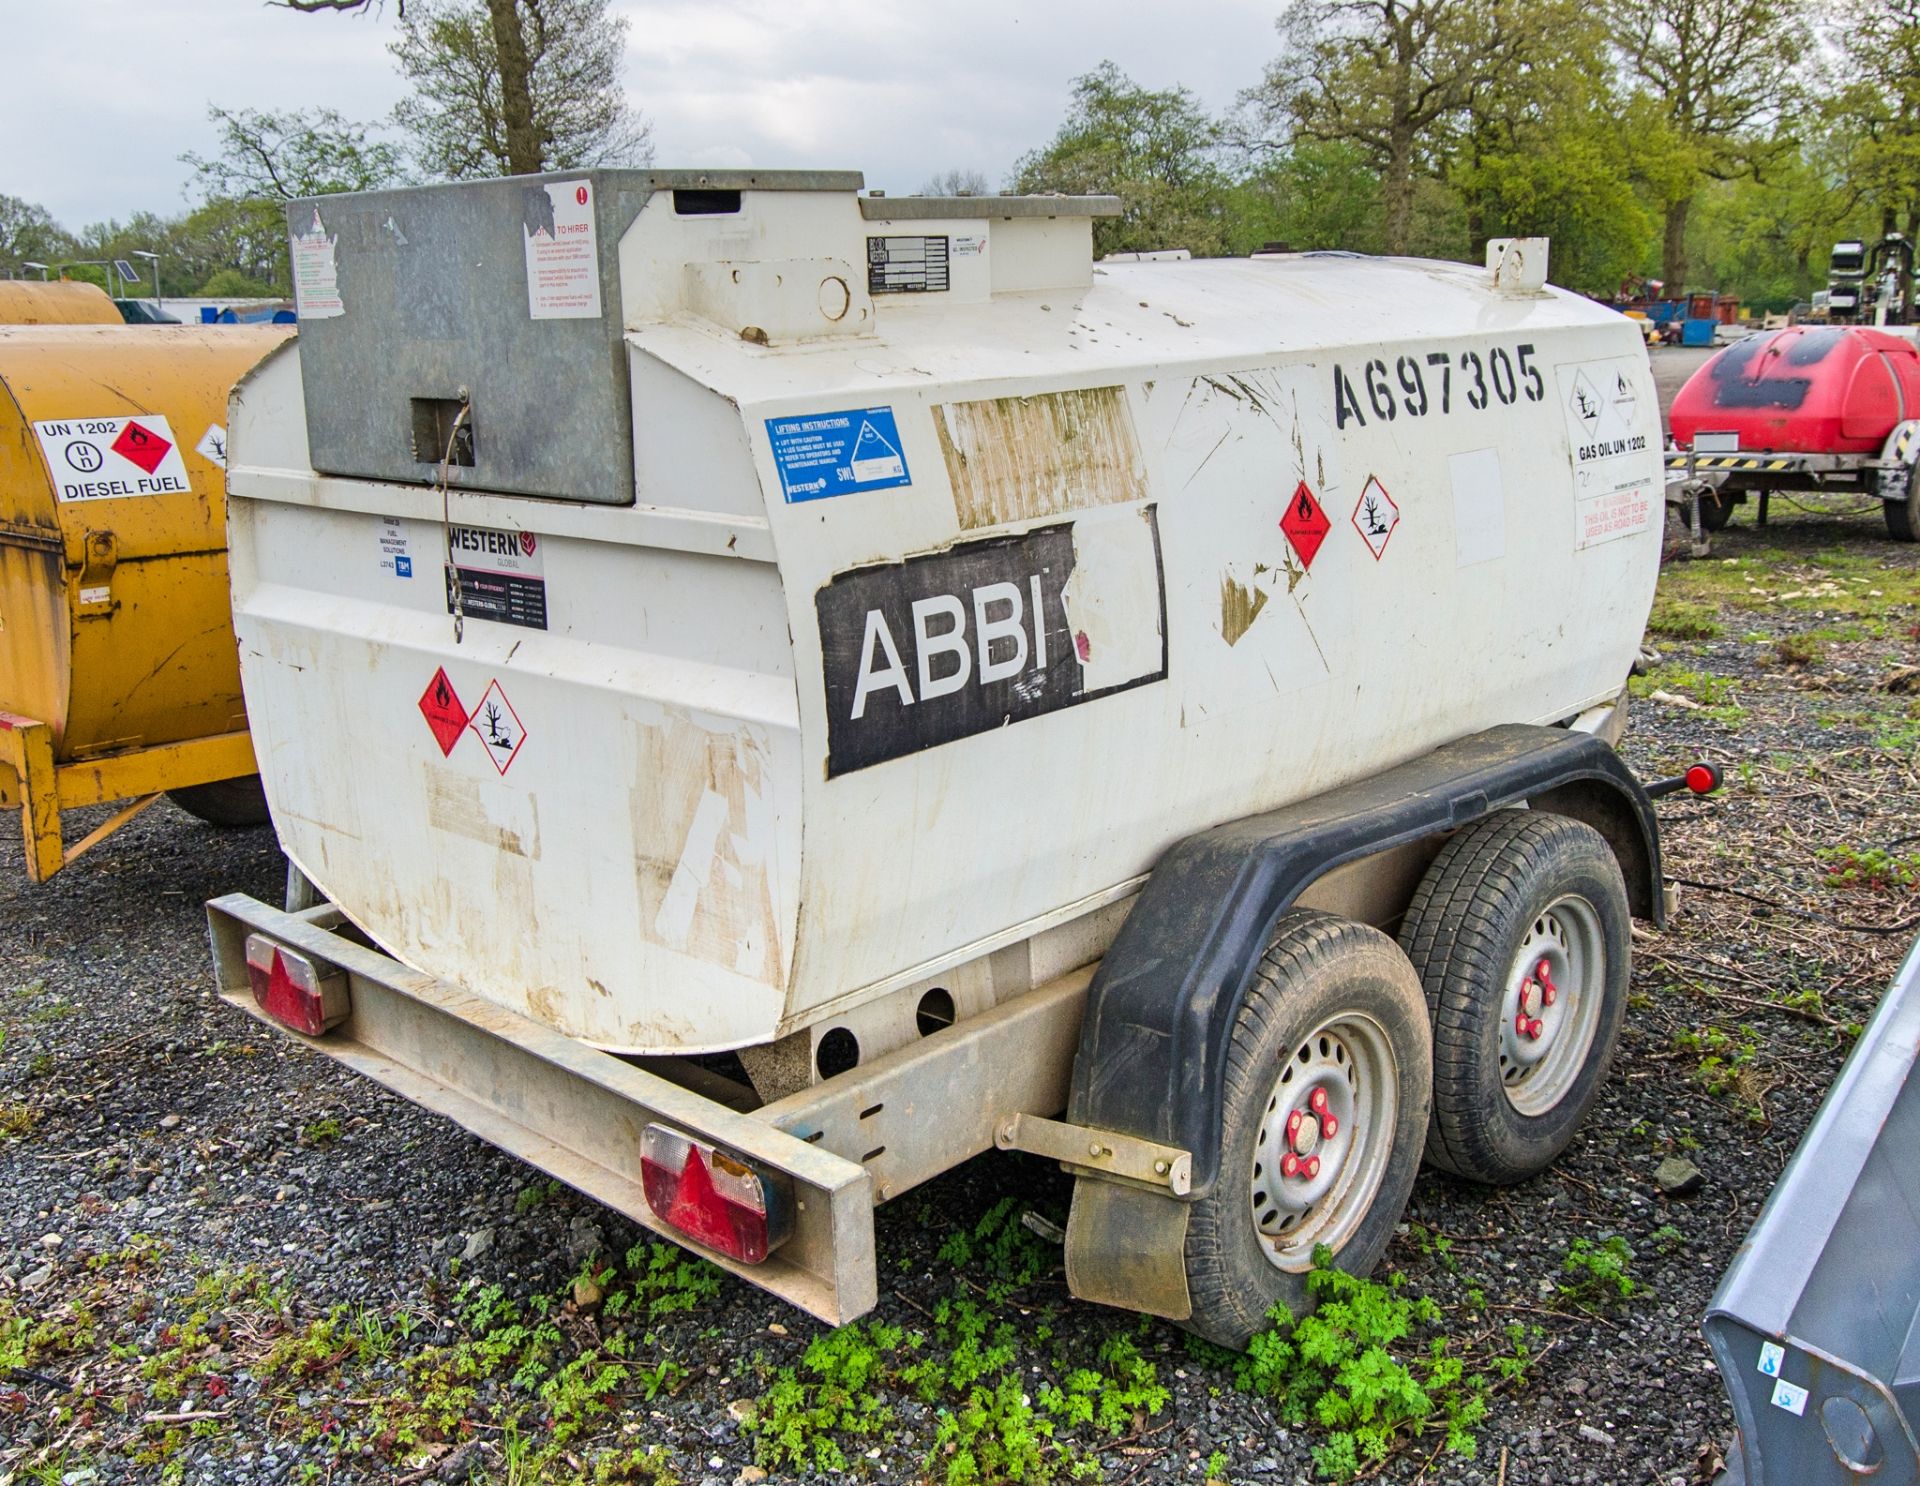 Western Abbi 200 litre tandem axle fast tow mobile bunded fuel bowser c/w manual pump, delivery hose - Image 3 of 7